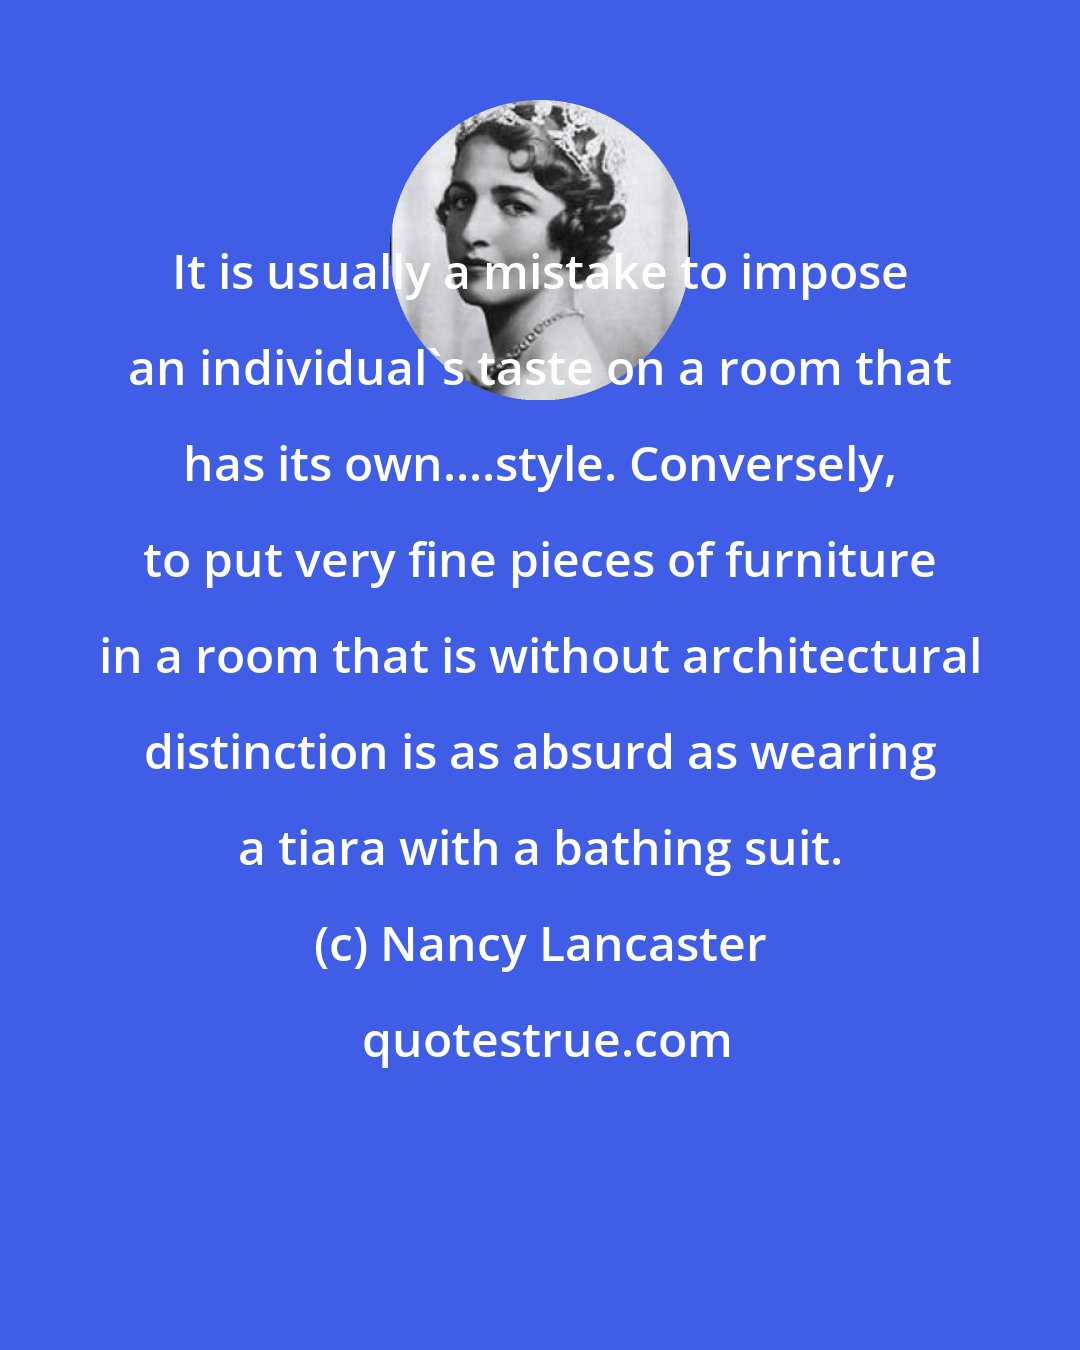 Nancy Lancaster: It is usually a mistake to impose an individual's taste on a room that has its own....style. Conversely, to put very fine pieces of furniture in a room that is without architectural distinction is as absurd as wearing a tiara with a bathing suit.